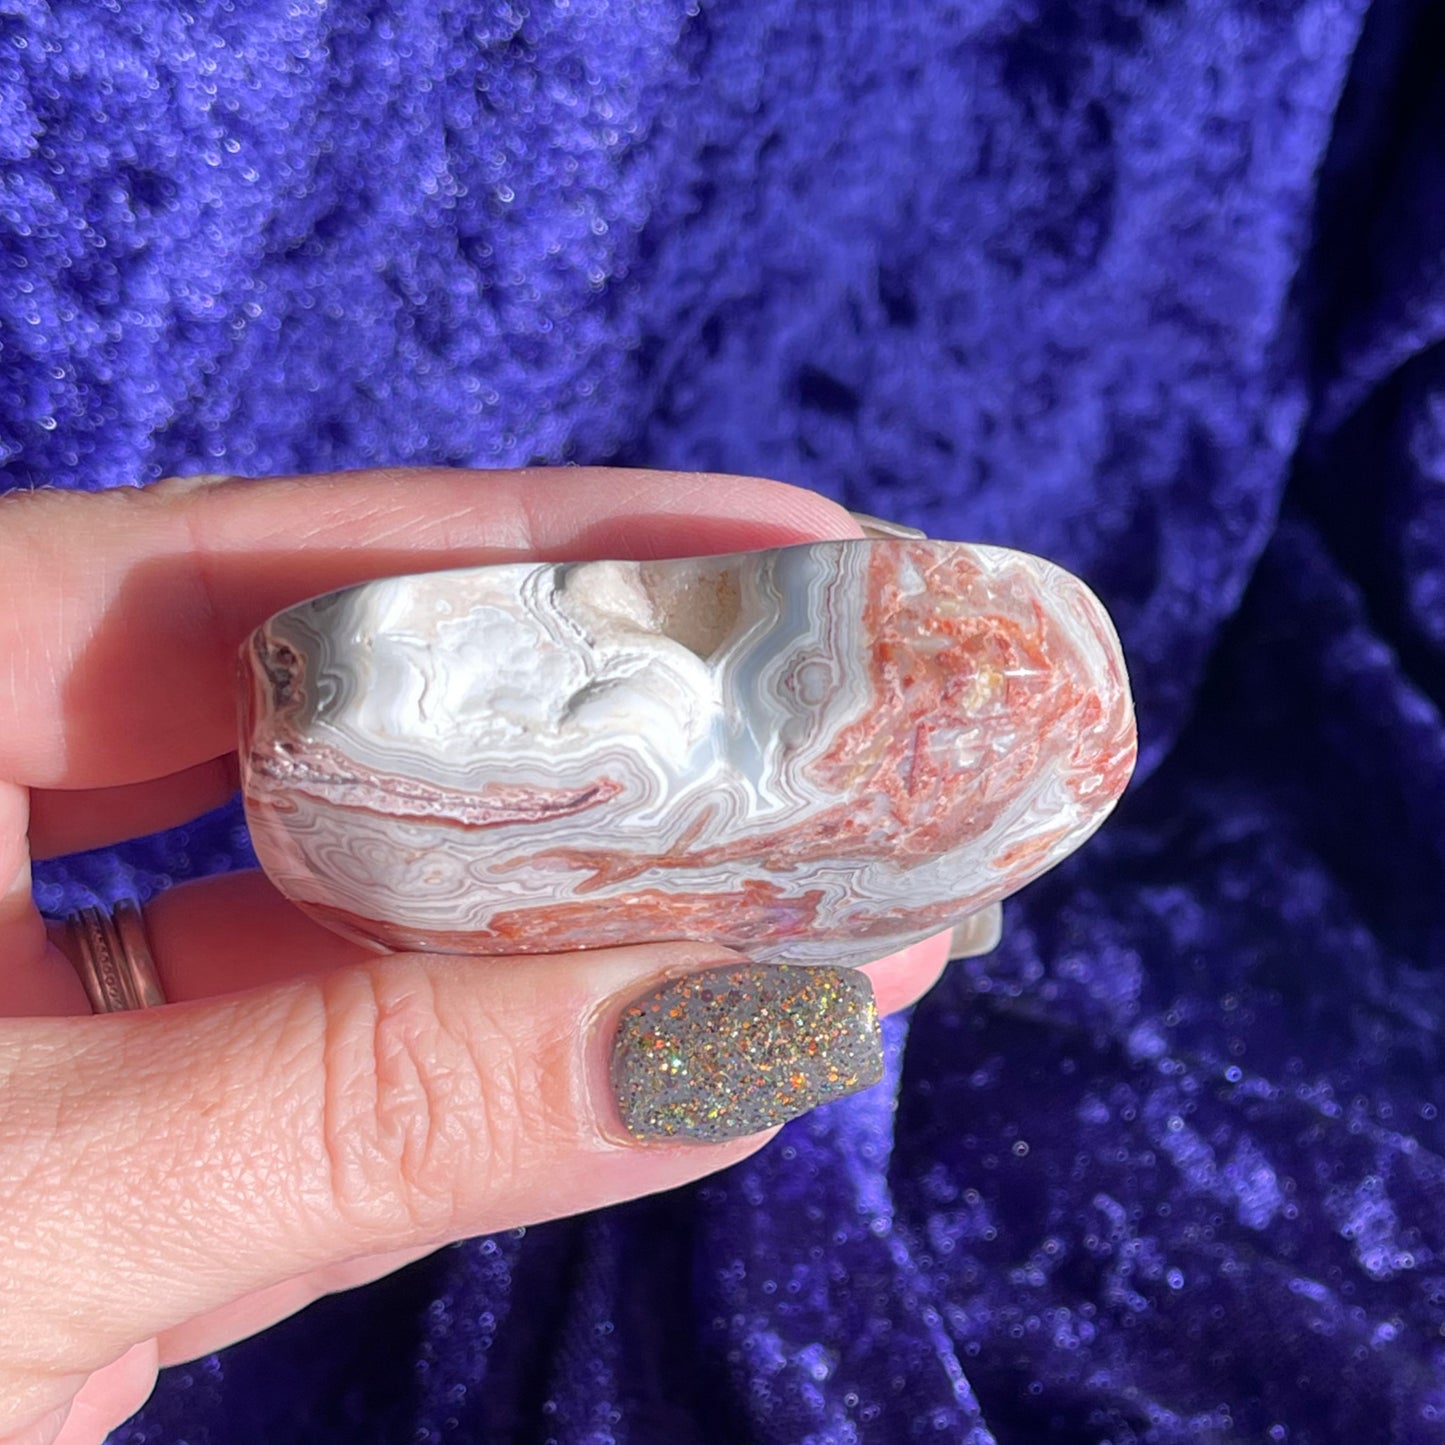 Crazy Lace Agate Heart With Druze 84g